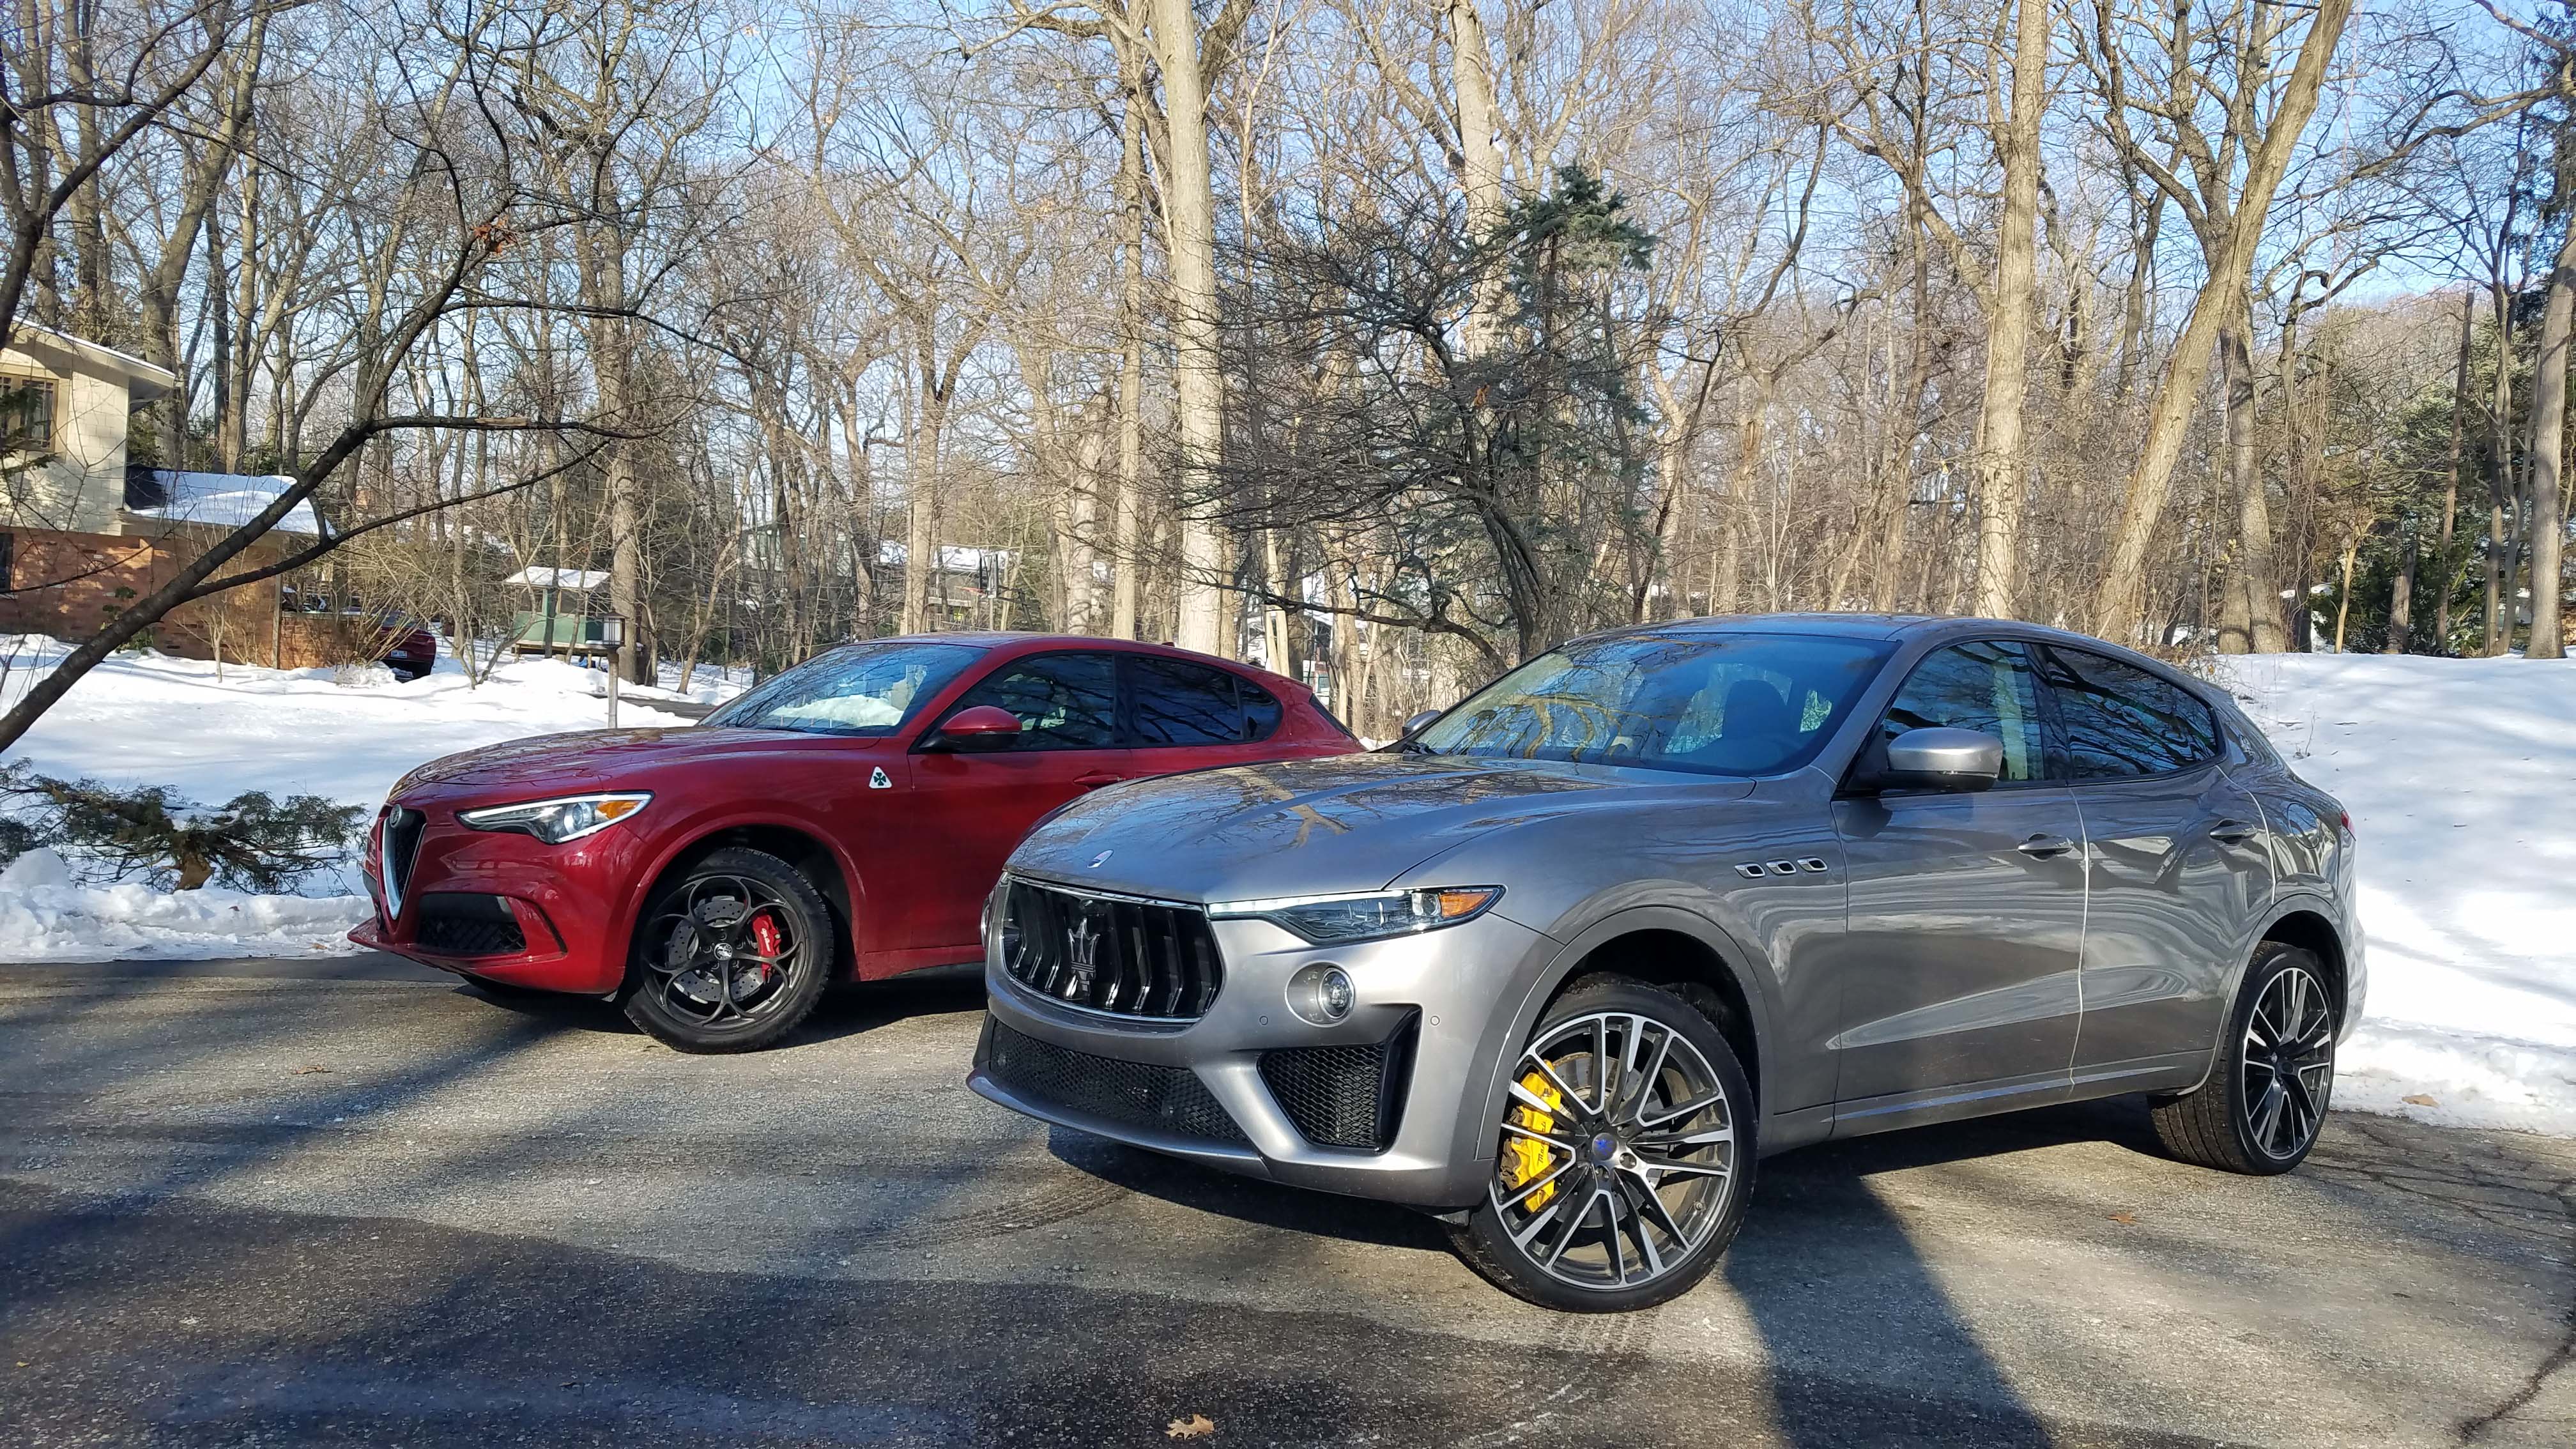 Italian stallions: The Alfa Romeo Stelvio Quadrifoglio, left, and Maserati Levante have become their brand's best-selling vehicles. But the Levante's big V-8 makes it feel more like an American muscle car than the fine-tuned Alfa.